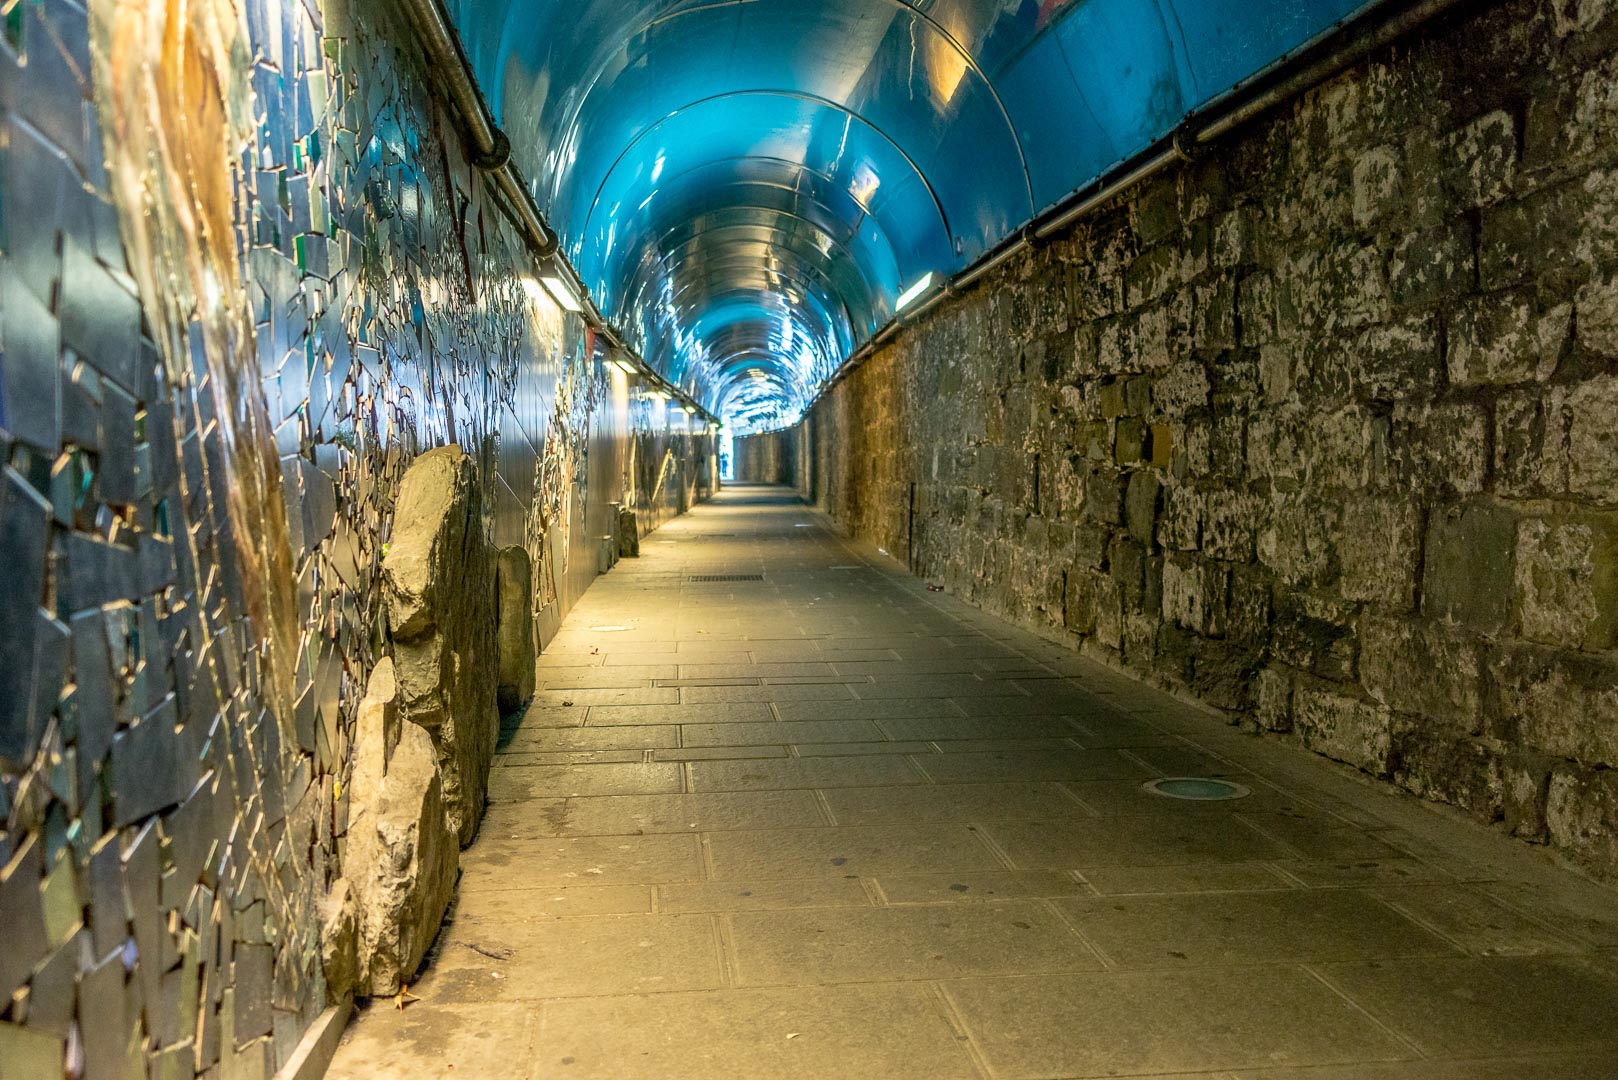 Backplate • ID: 5607 • HDRI Haven - Tunnel With Concrete Path 